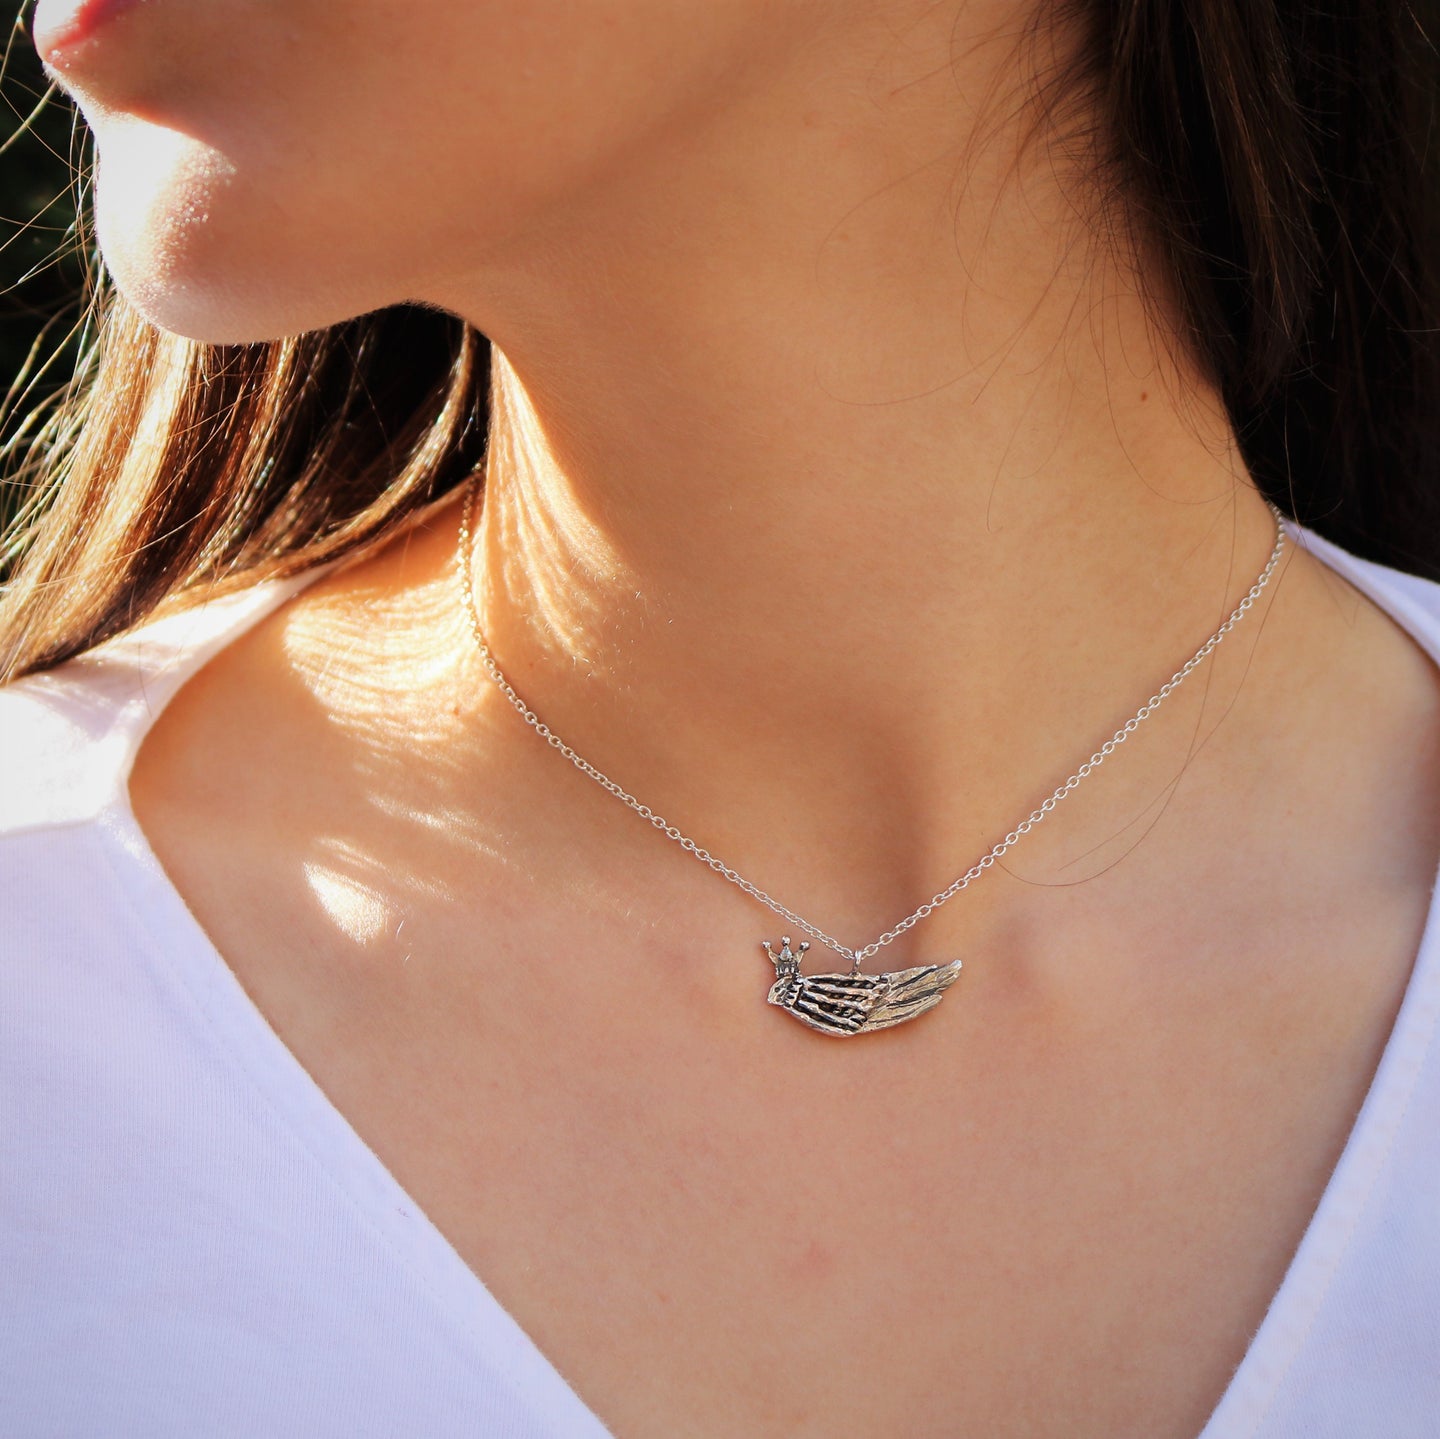 Rare Bird Necklace in Sterling Silver